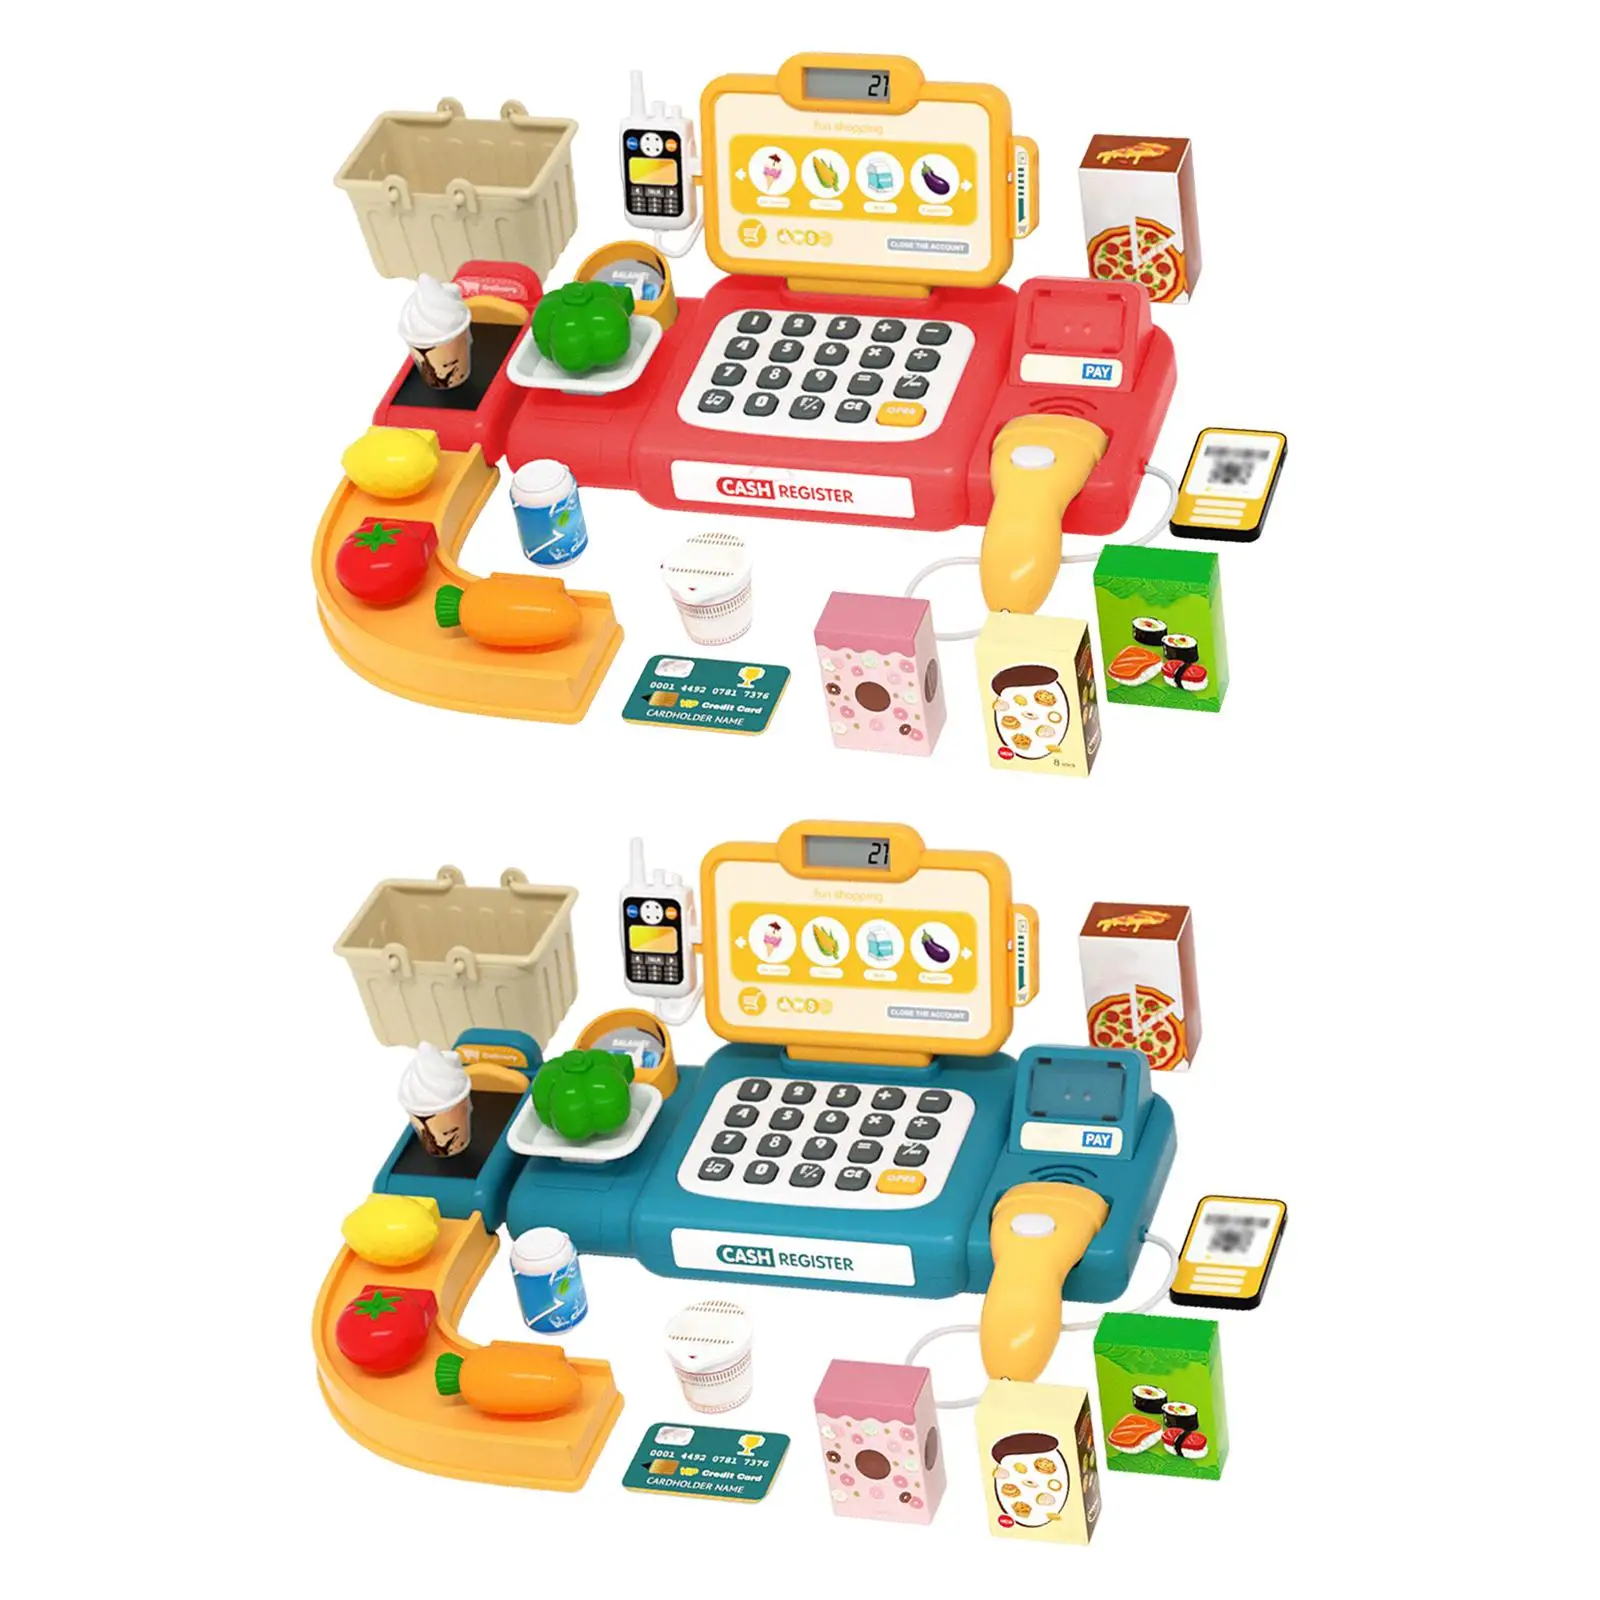 Pretend Play Store Educational Grocery Supermarket Playset Supermarket Cashier Toy for Interaction Play Activity Role Play